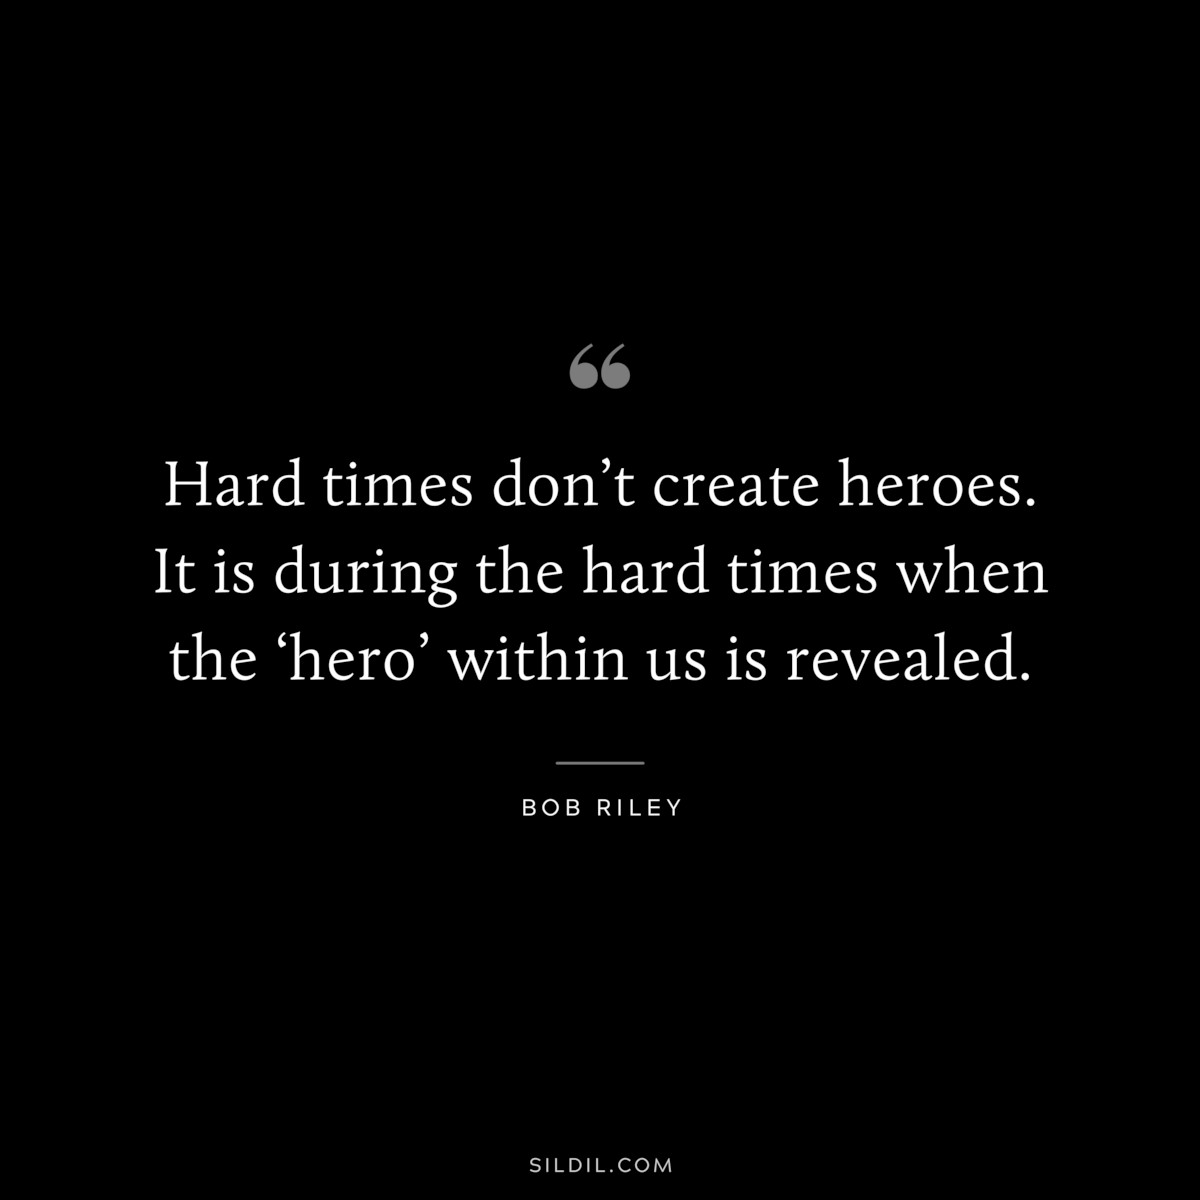 Hard times don’t create heroes. It is during the hard times when the ‘hero’ within us is revealed. ― Bob Riley